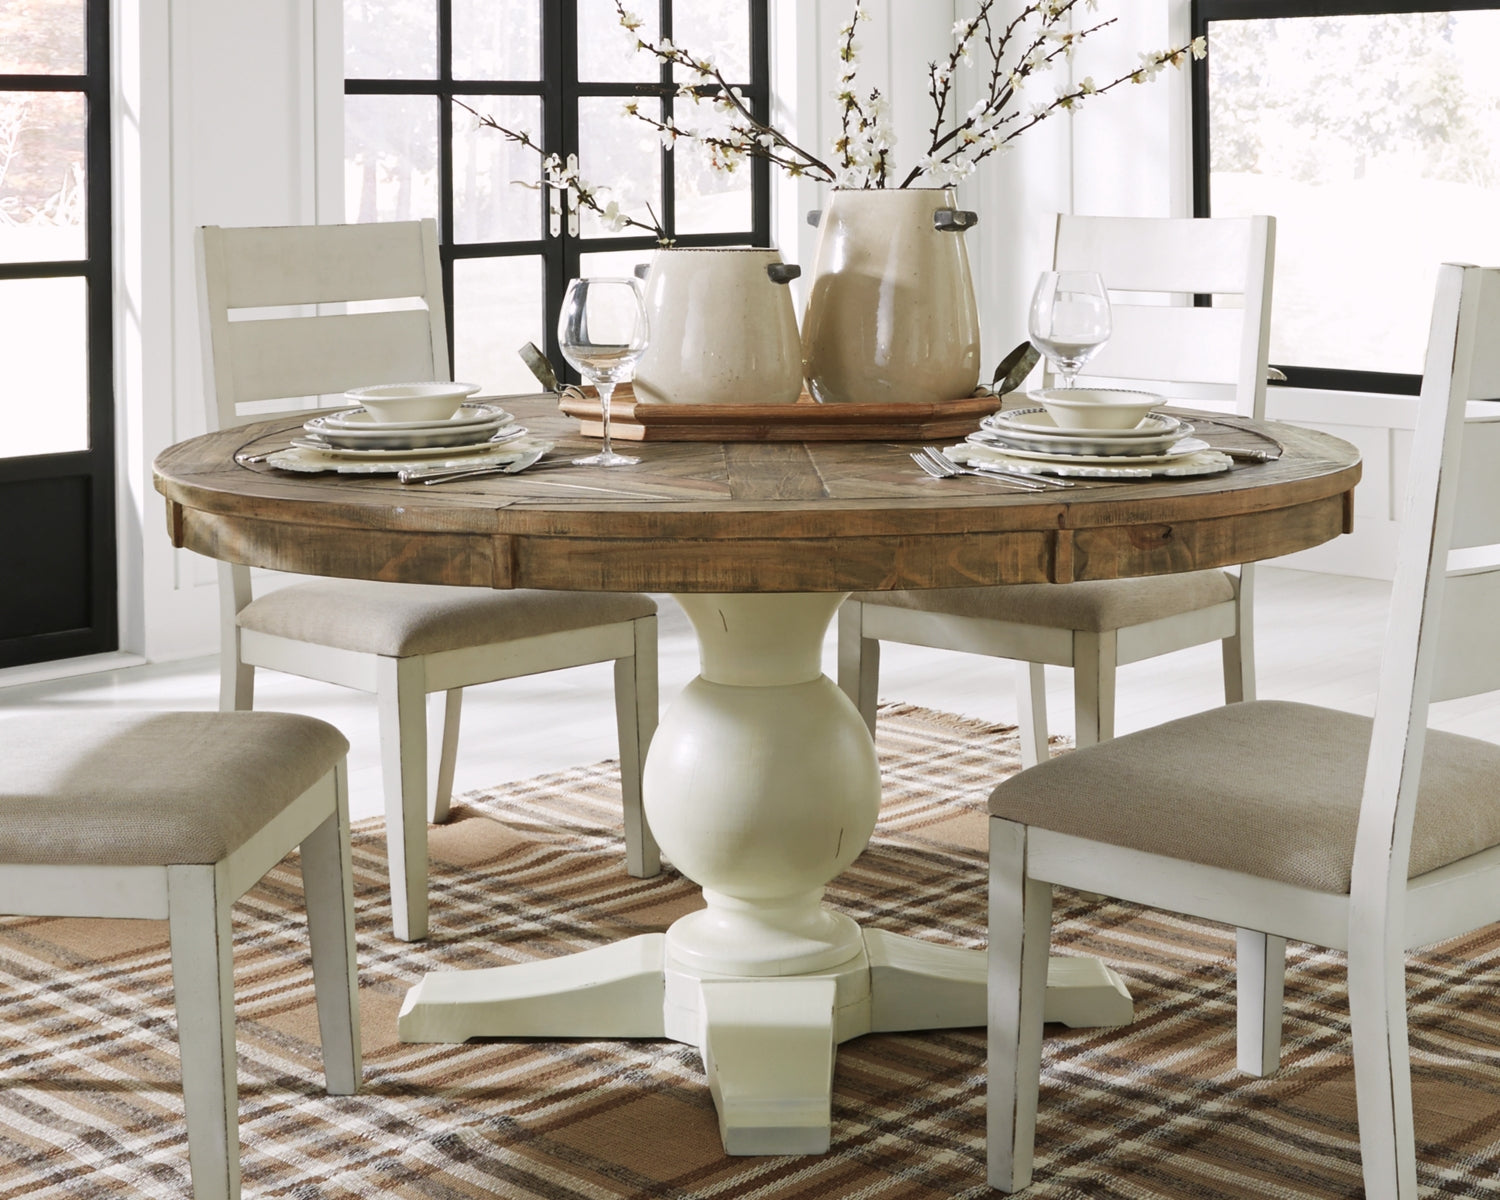 Grindleburg Dining Table and 4 Chairs